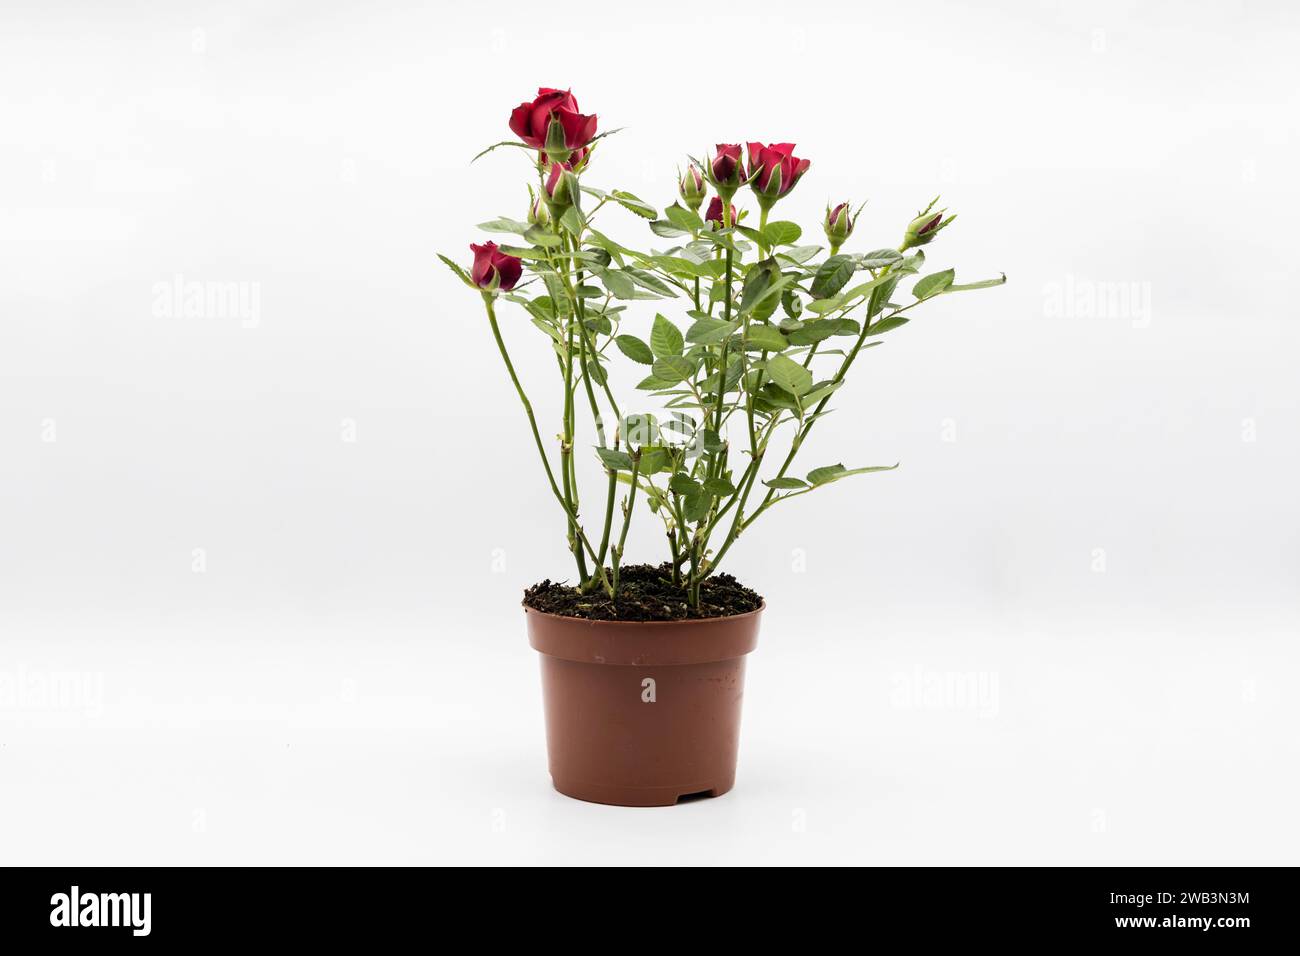 The red roses in a pot isolated on a white background. Stock Photo